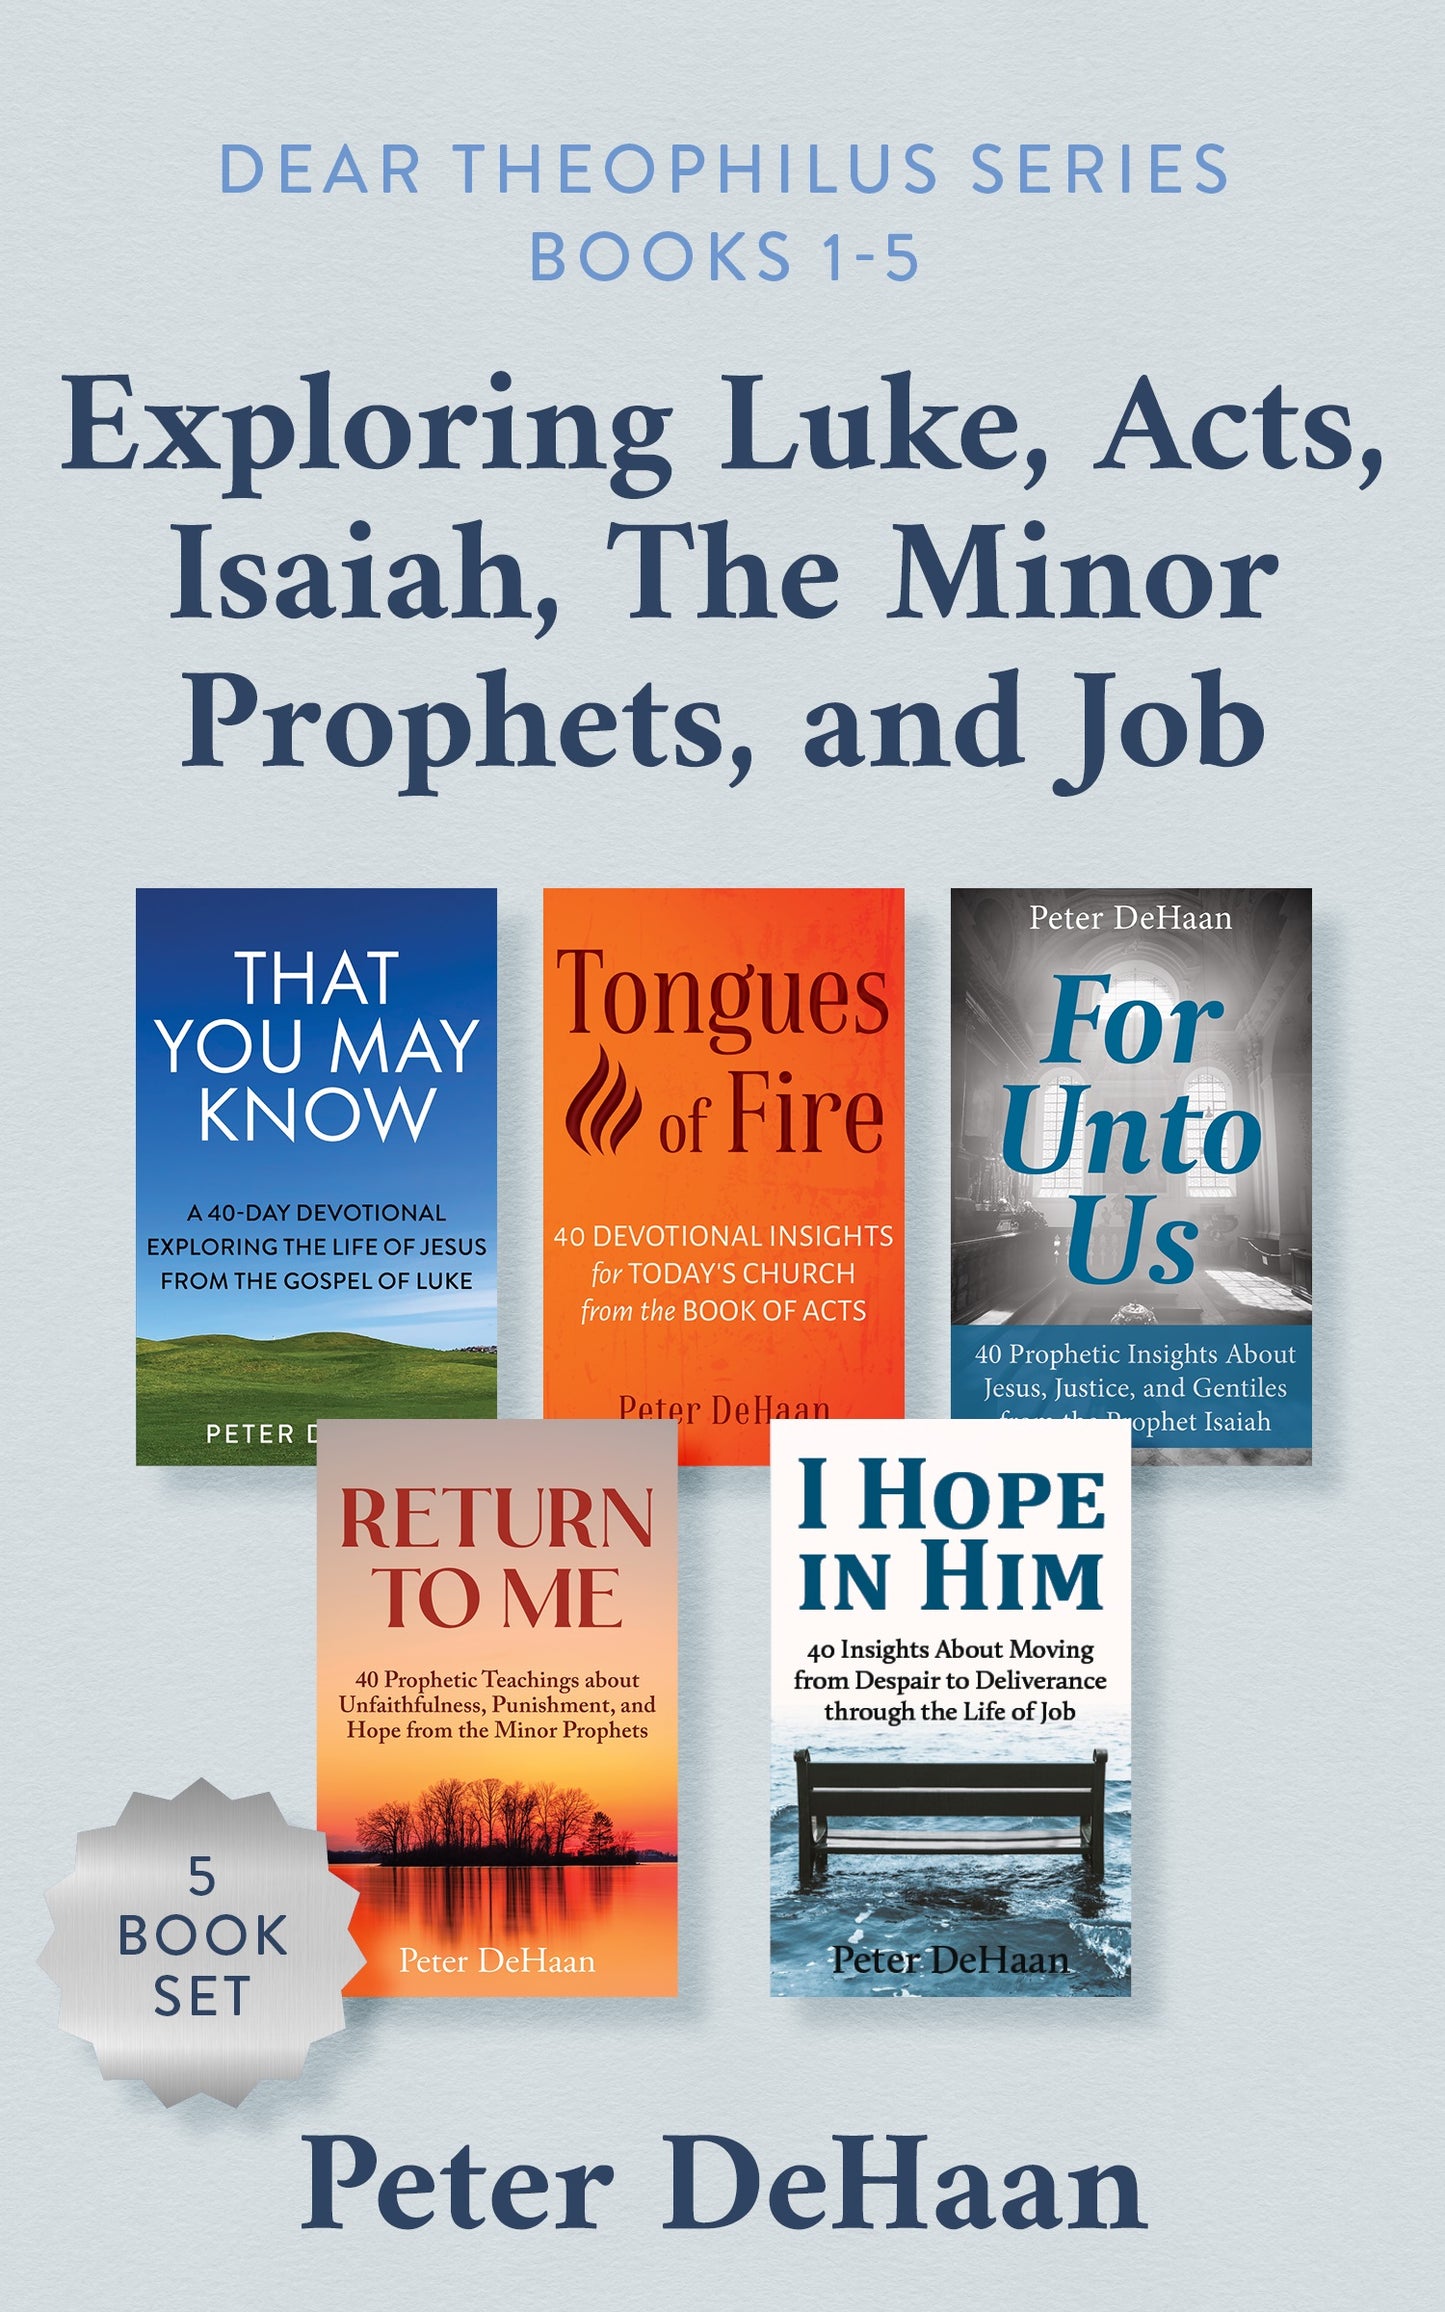 Dear Theophilus Books 1–5: Exploring Luke, Acts, Isaiah, Job, and the Minor Prophets boxset (ebook)